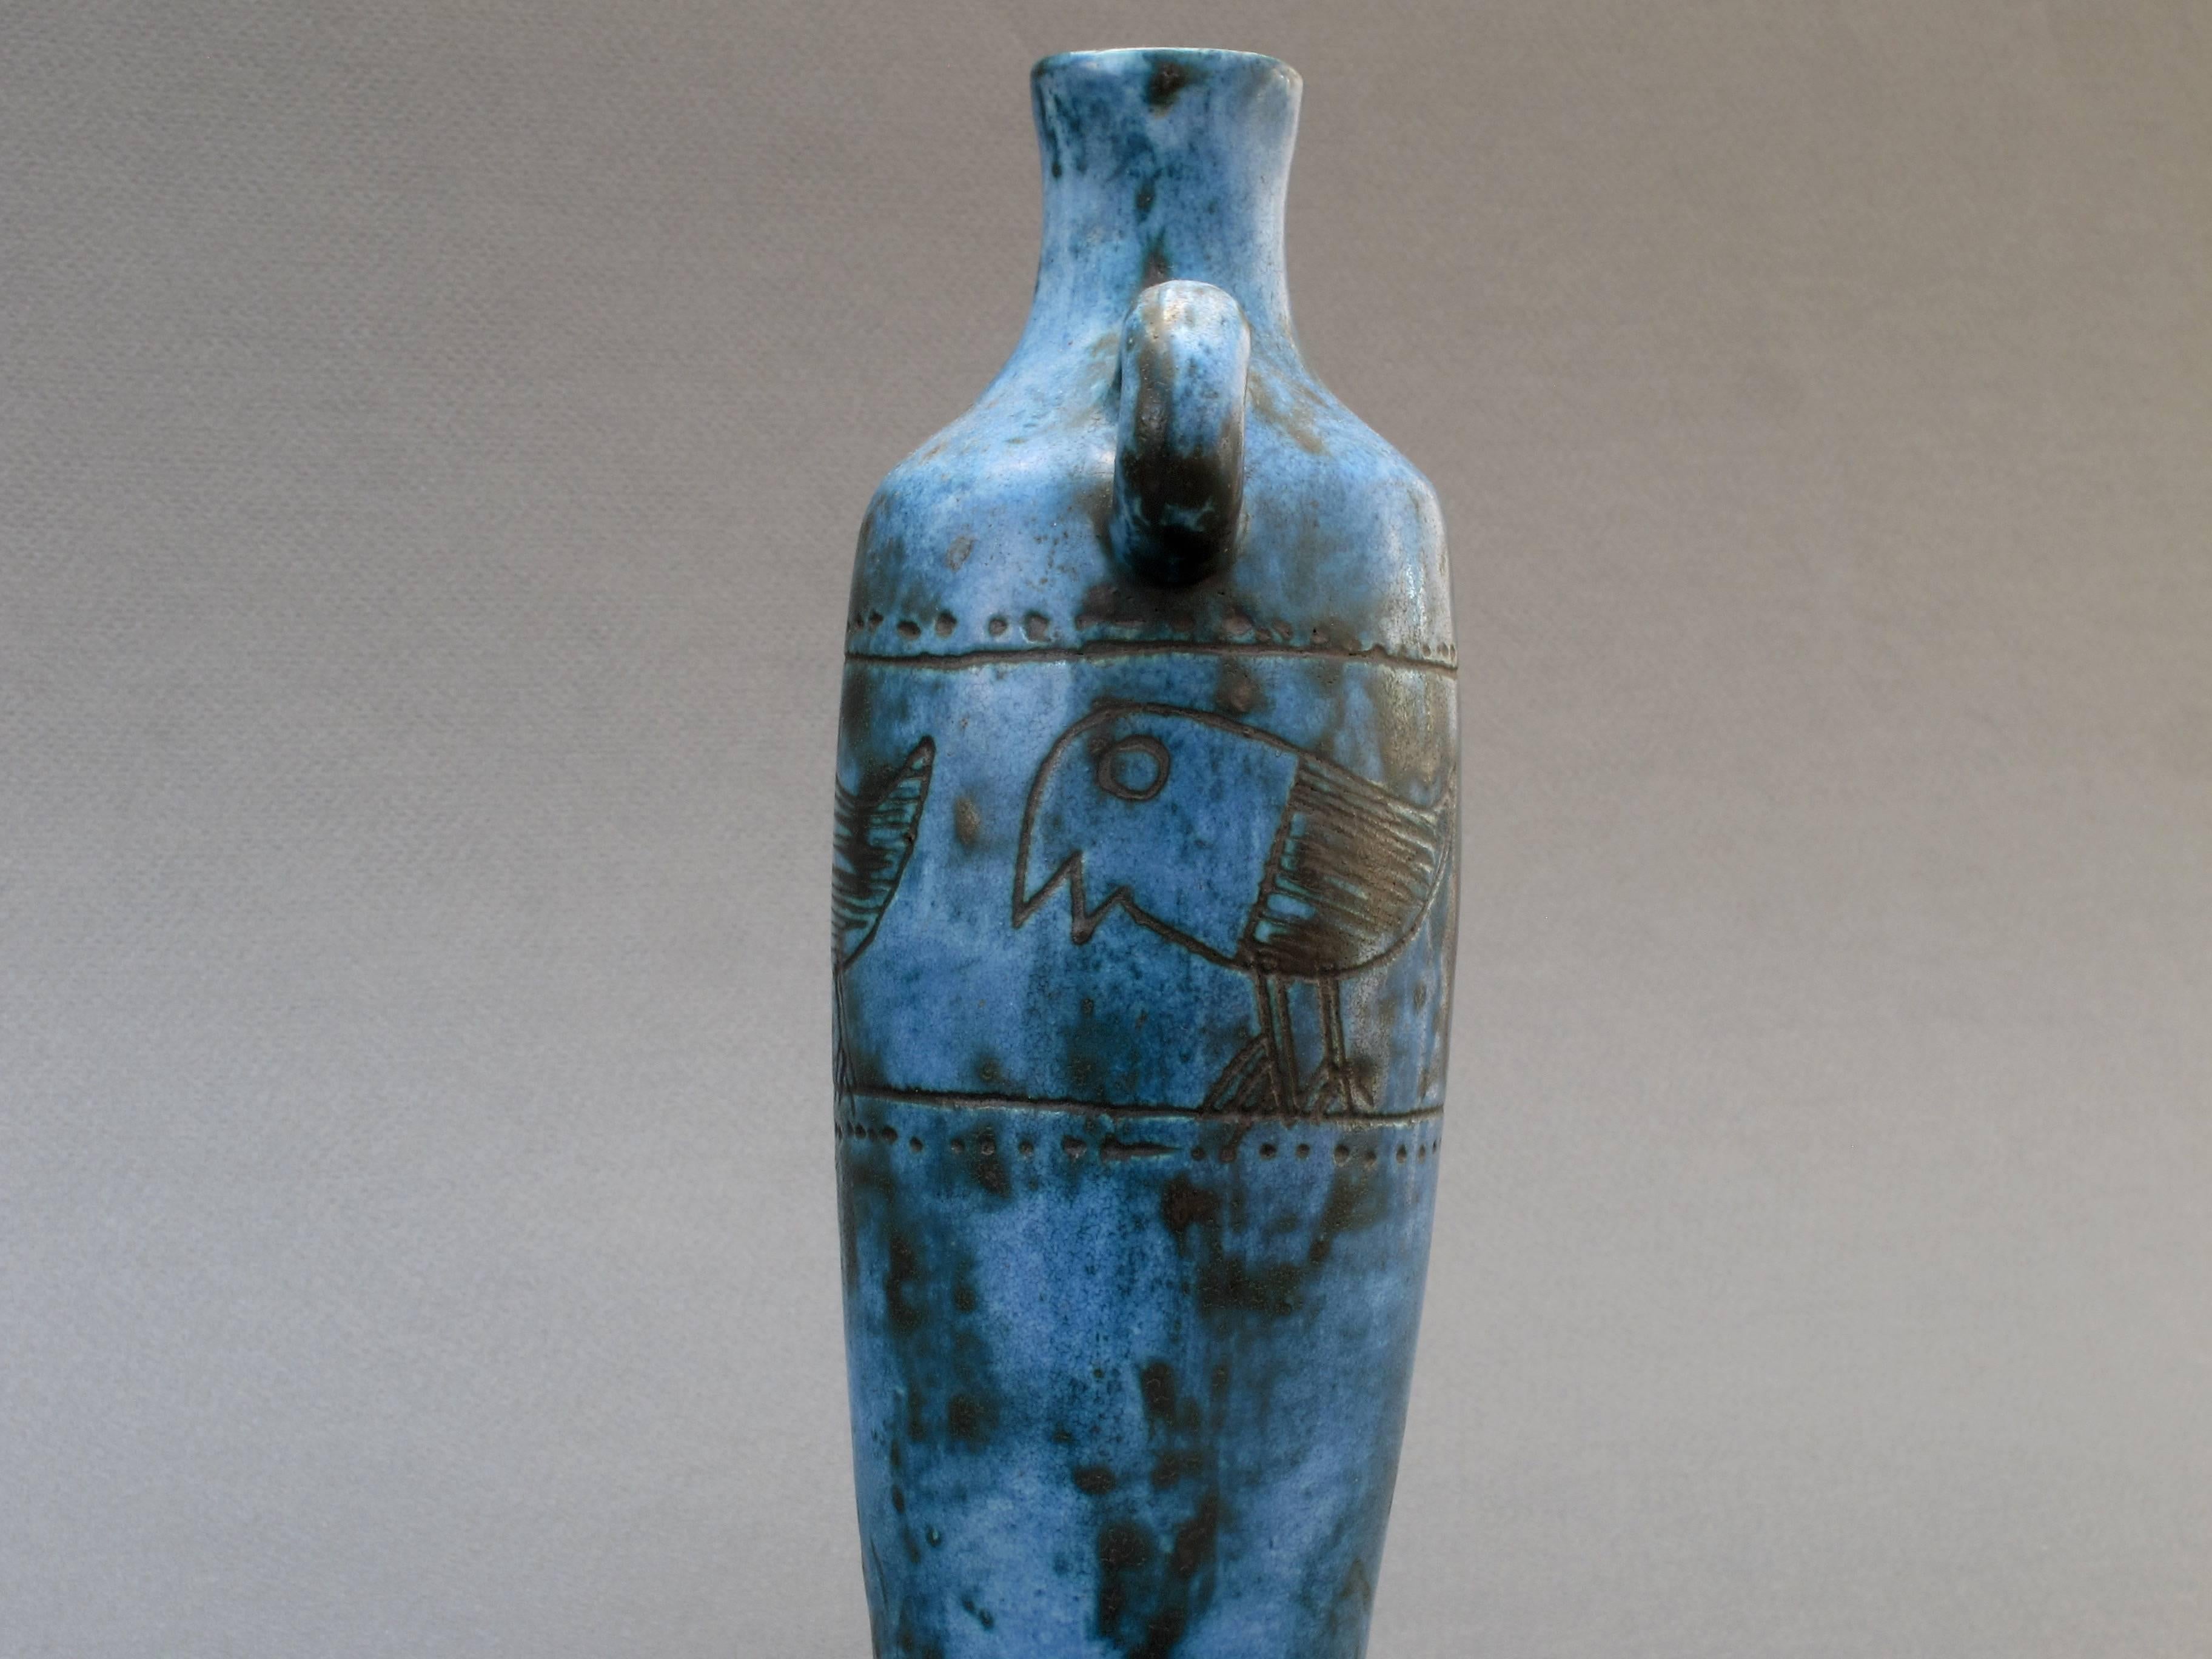 20th Century Mid-Century Blue Ceramic Vase by Jacques Blin, Vallauris, France, circa 1950s